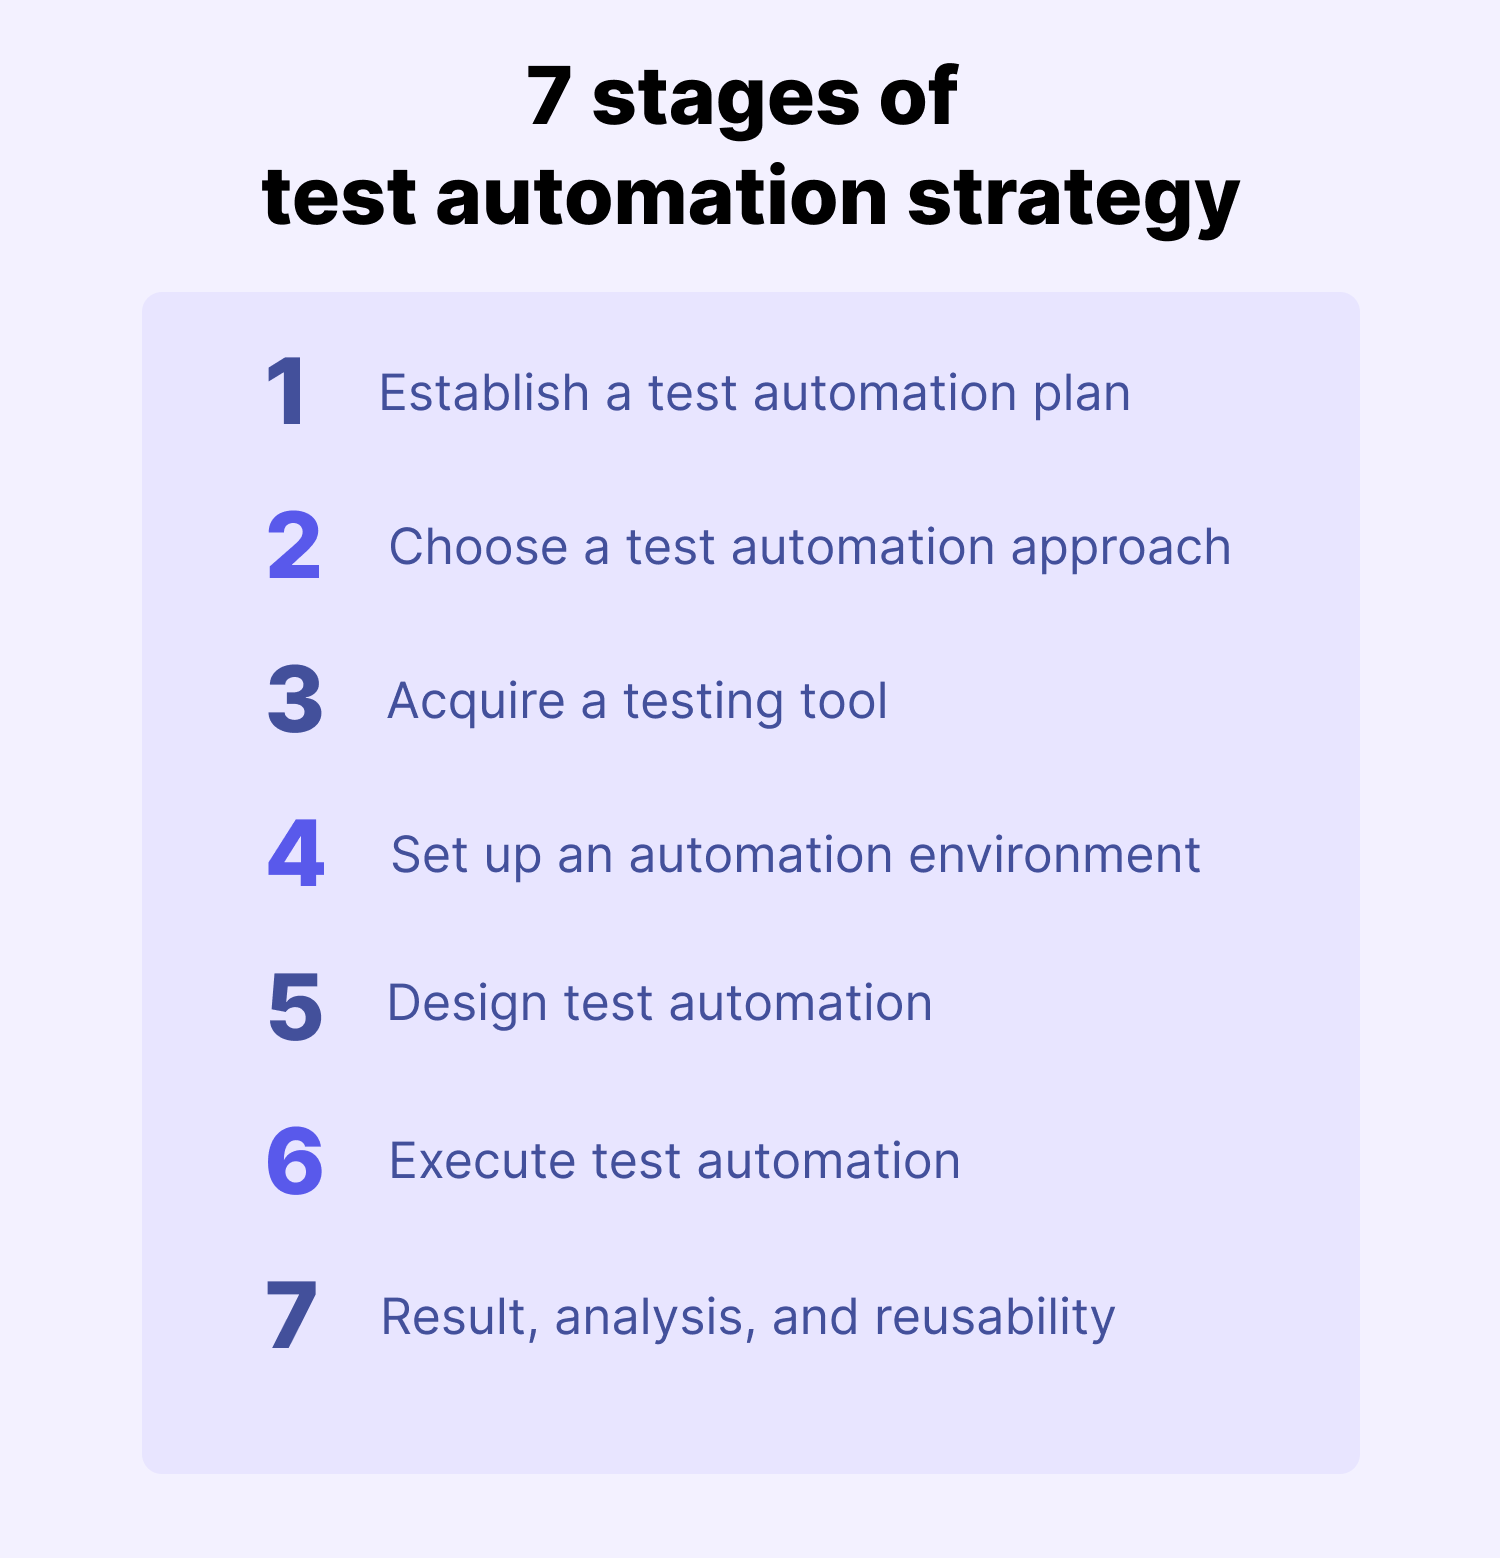 7 Stages of Test Automation Strategy